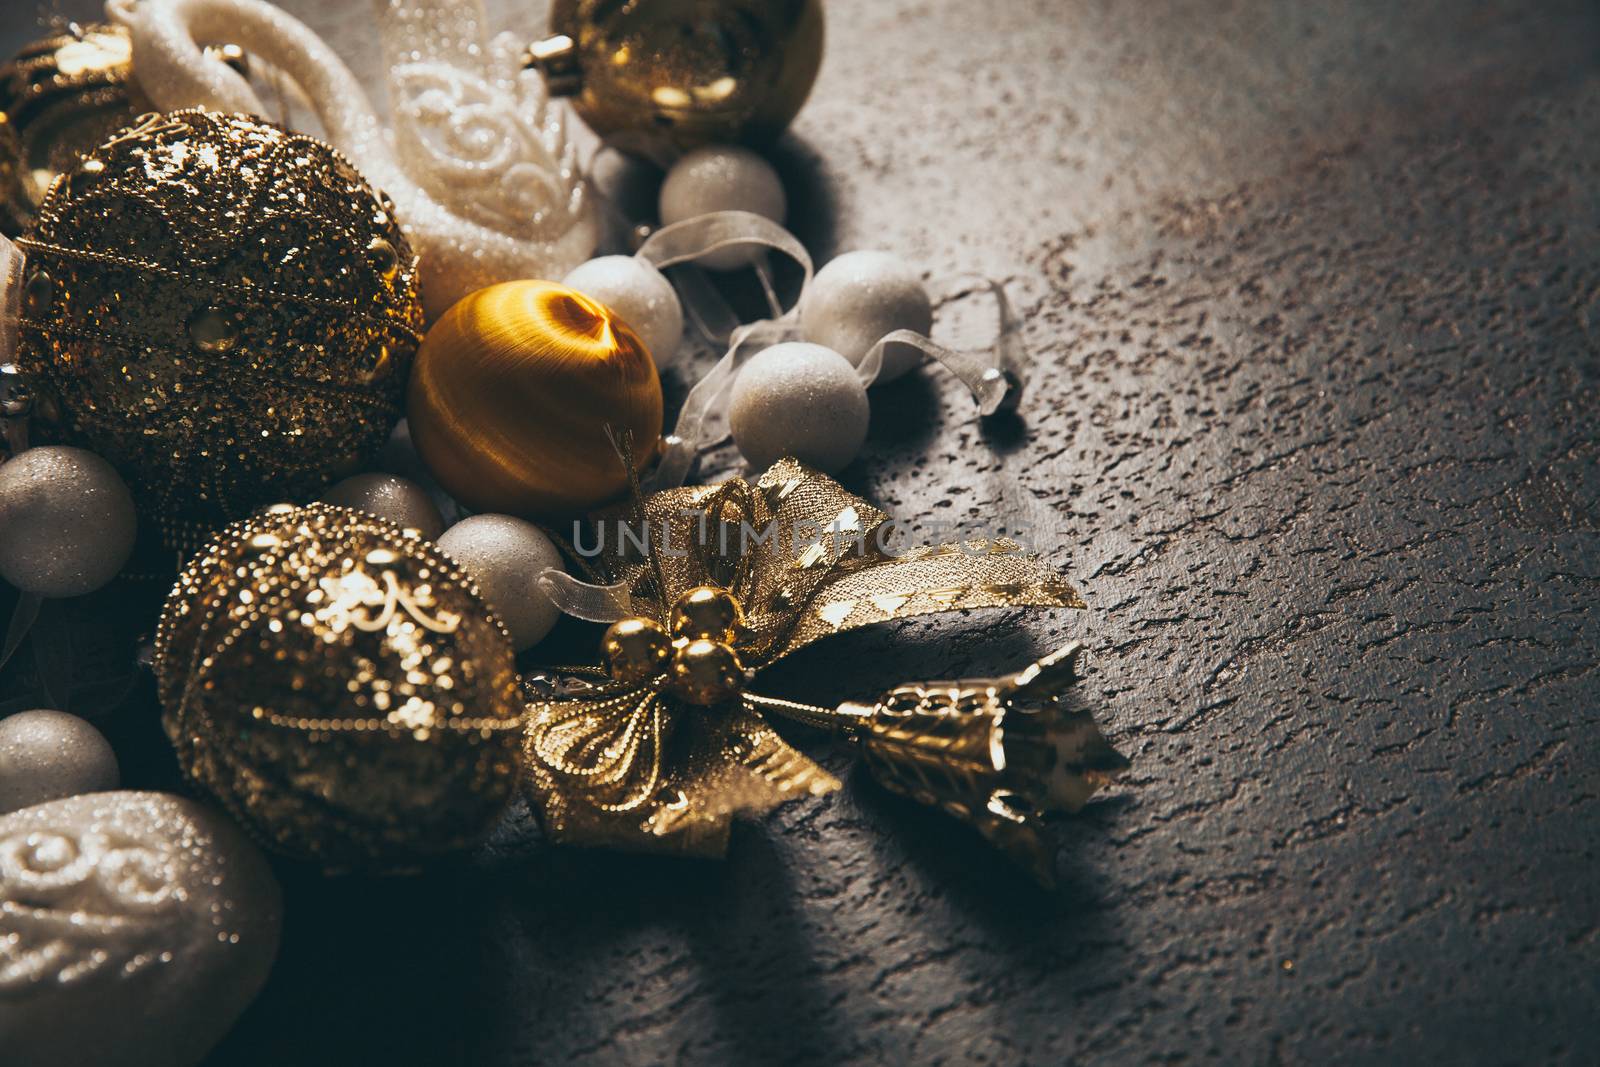 Sparkling Christmas 2019 background with golden and white decor